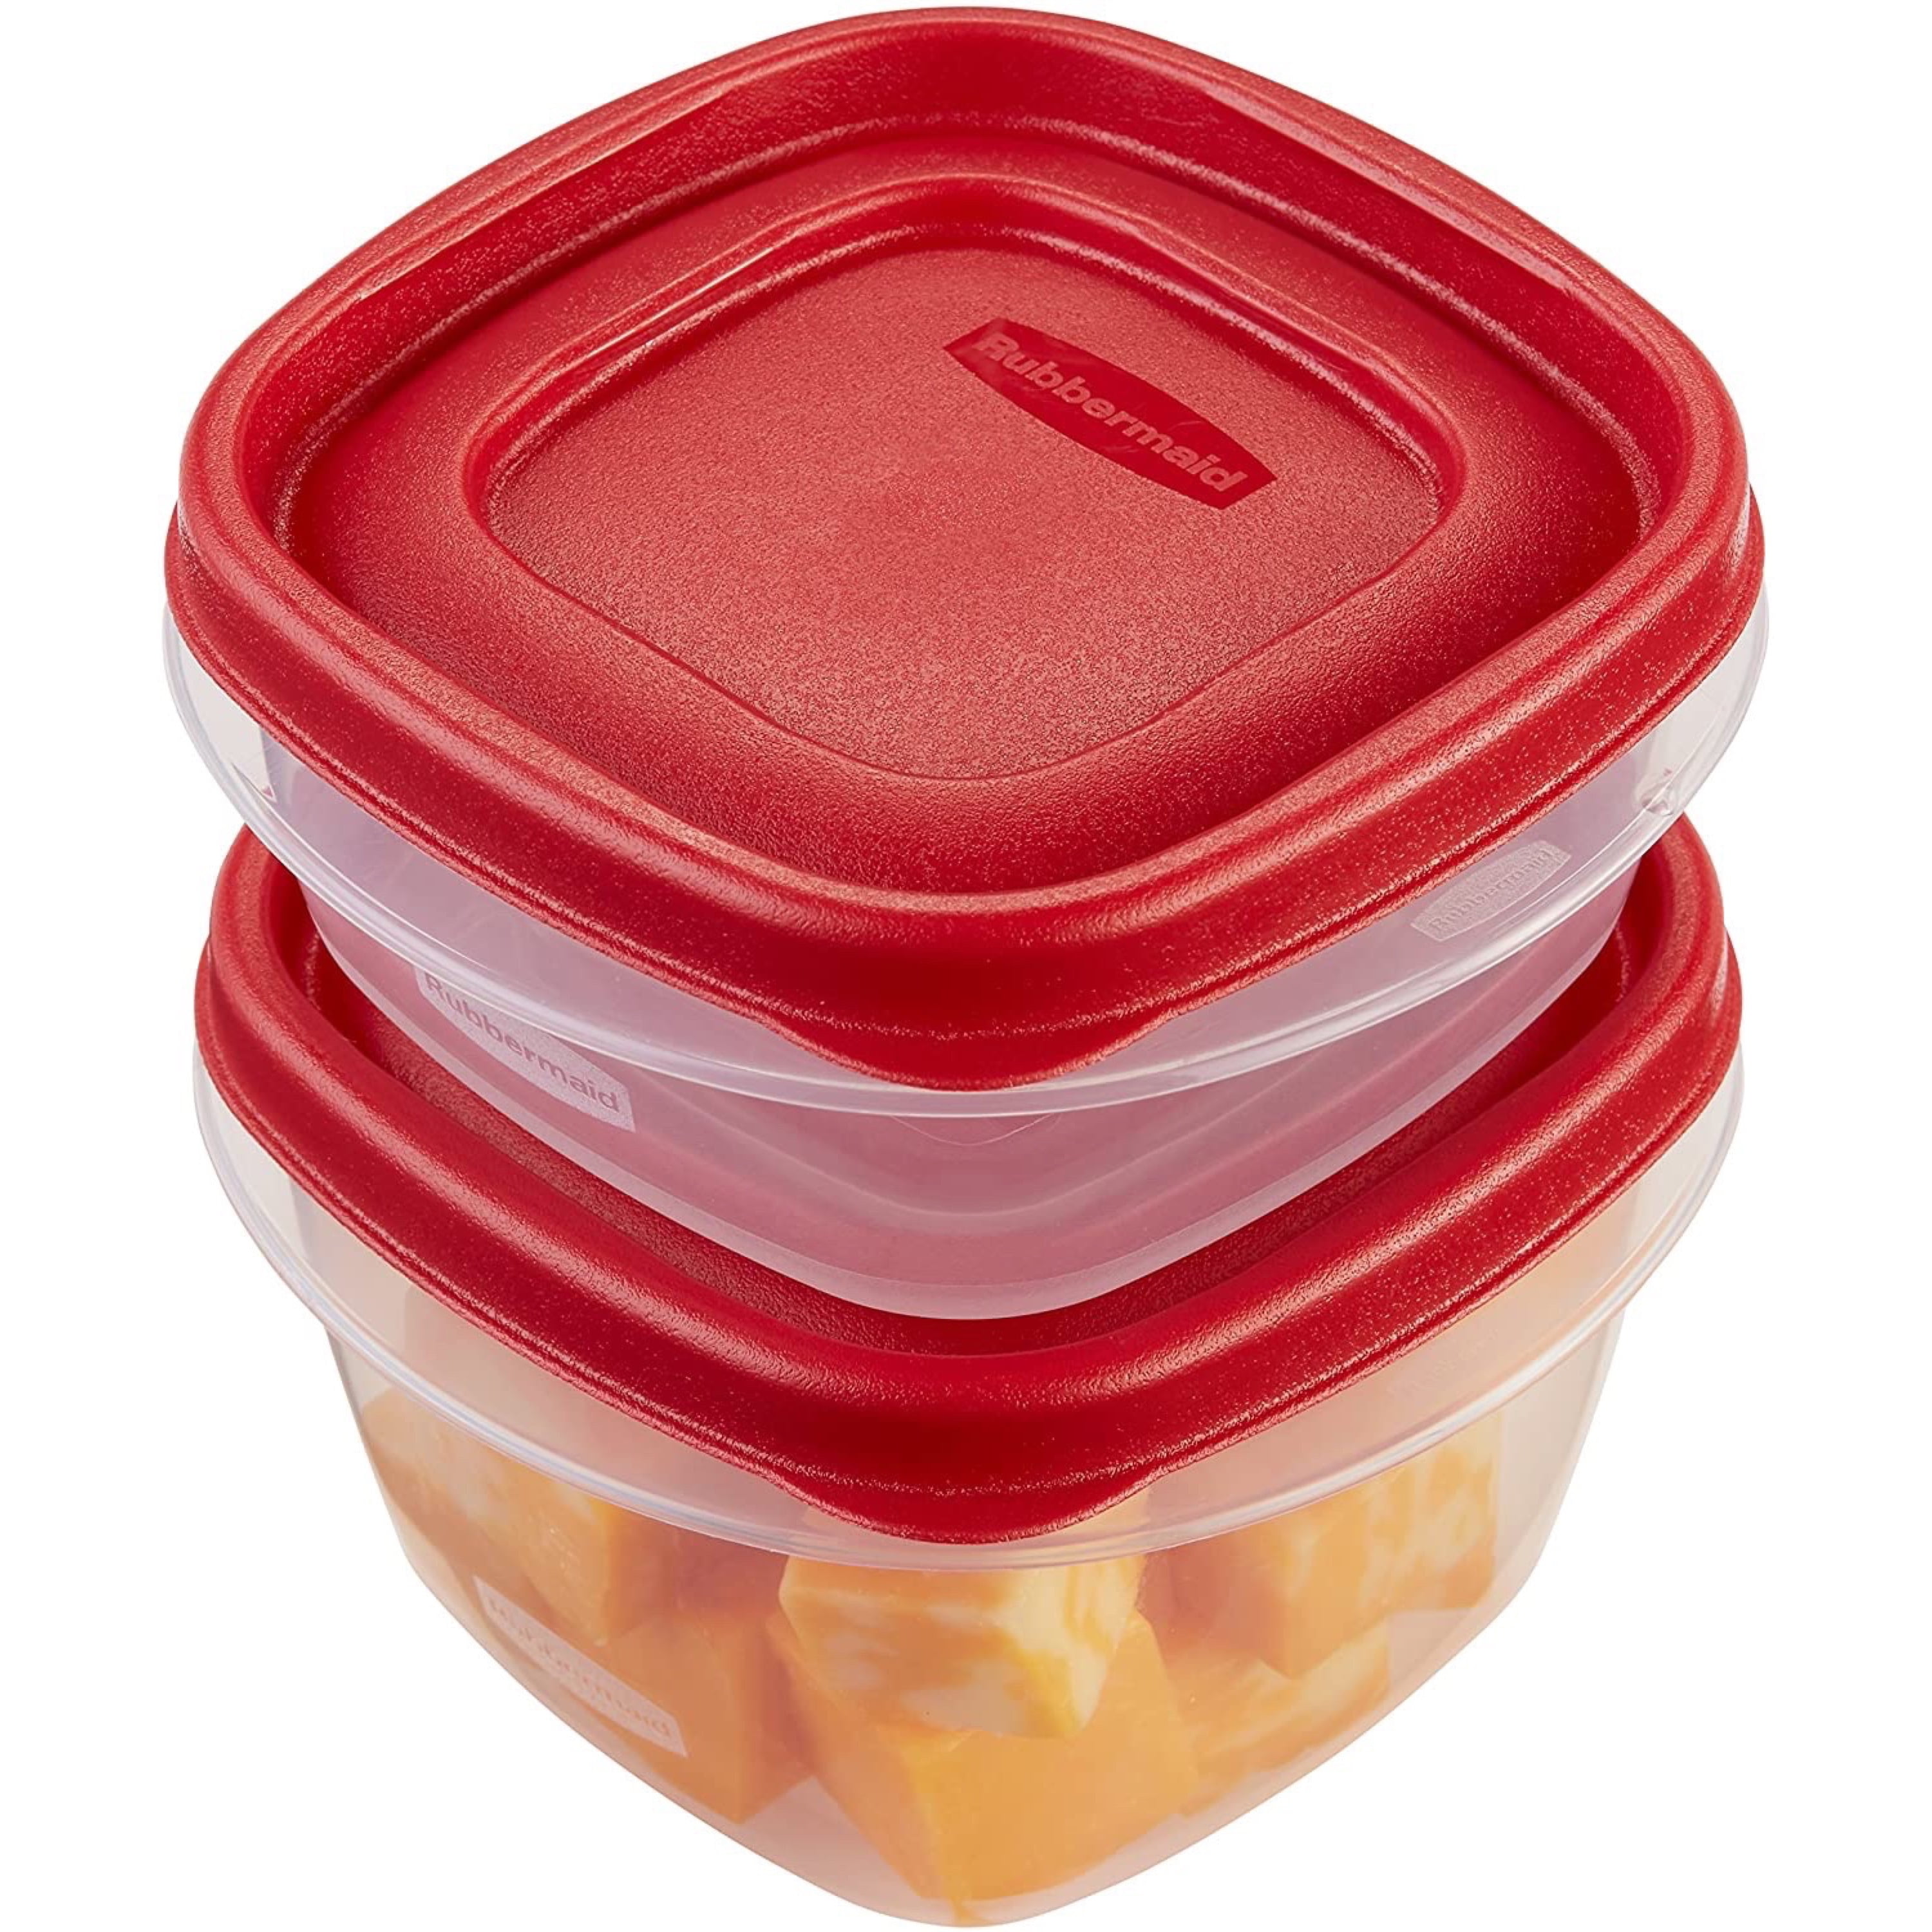 Rubbermaid Easy Find Lids Food Storage Container, 4-Piece Set, Red (1787251)